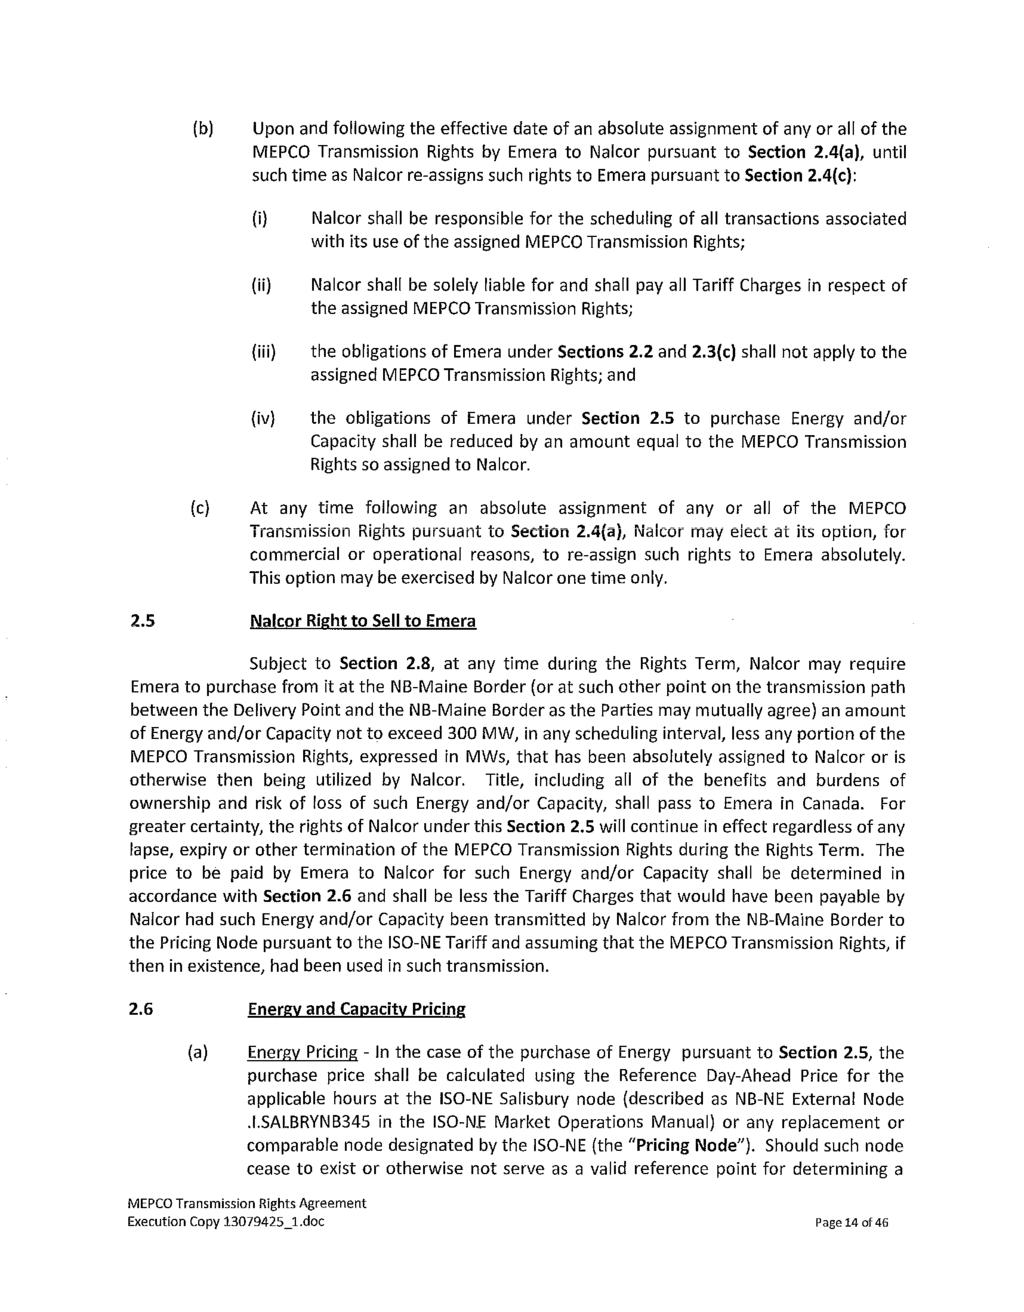 Maritime Link Appendix 2.08 Page 19 of 108 b) Upon and following the effective date of an absolute assignment of any or all of the MEPCO Transmission Rights by Emera to Nalcor pursuant to Section 2.